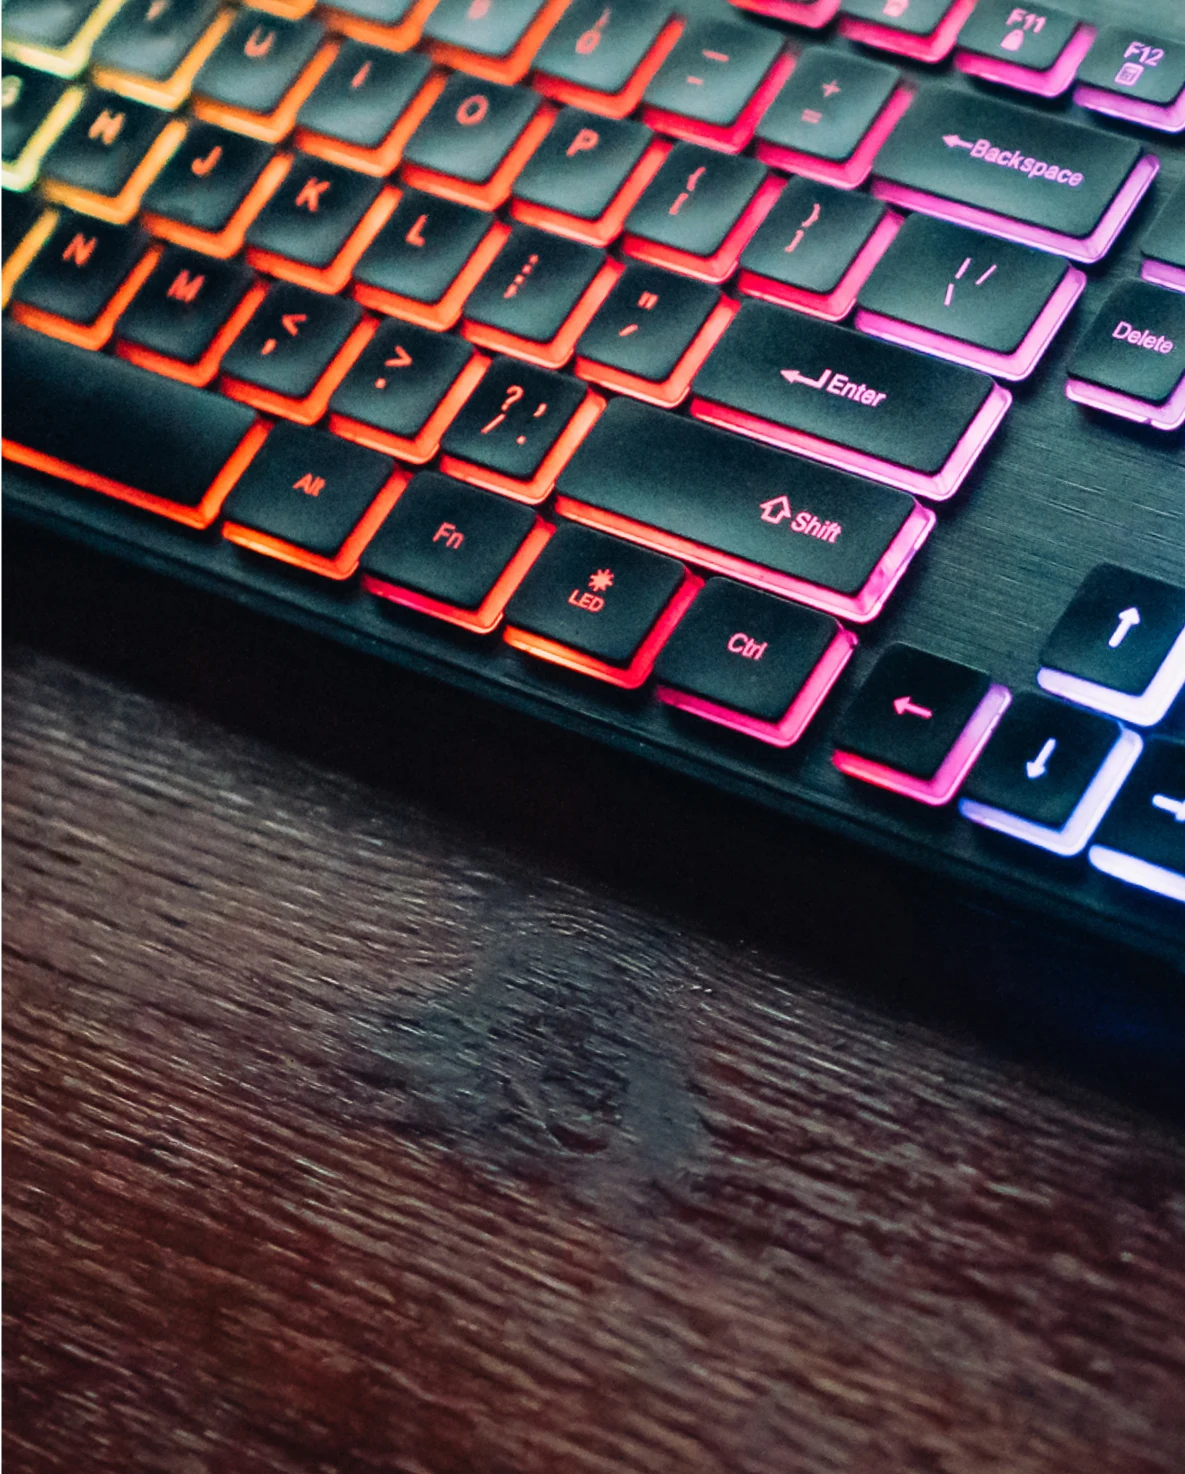 Keyboard that lights up with rainbow colors